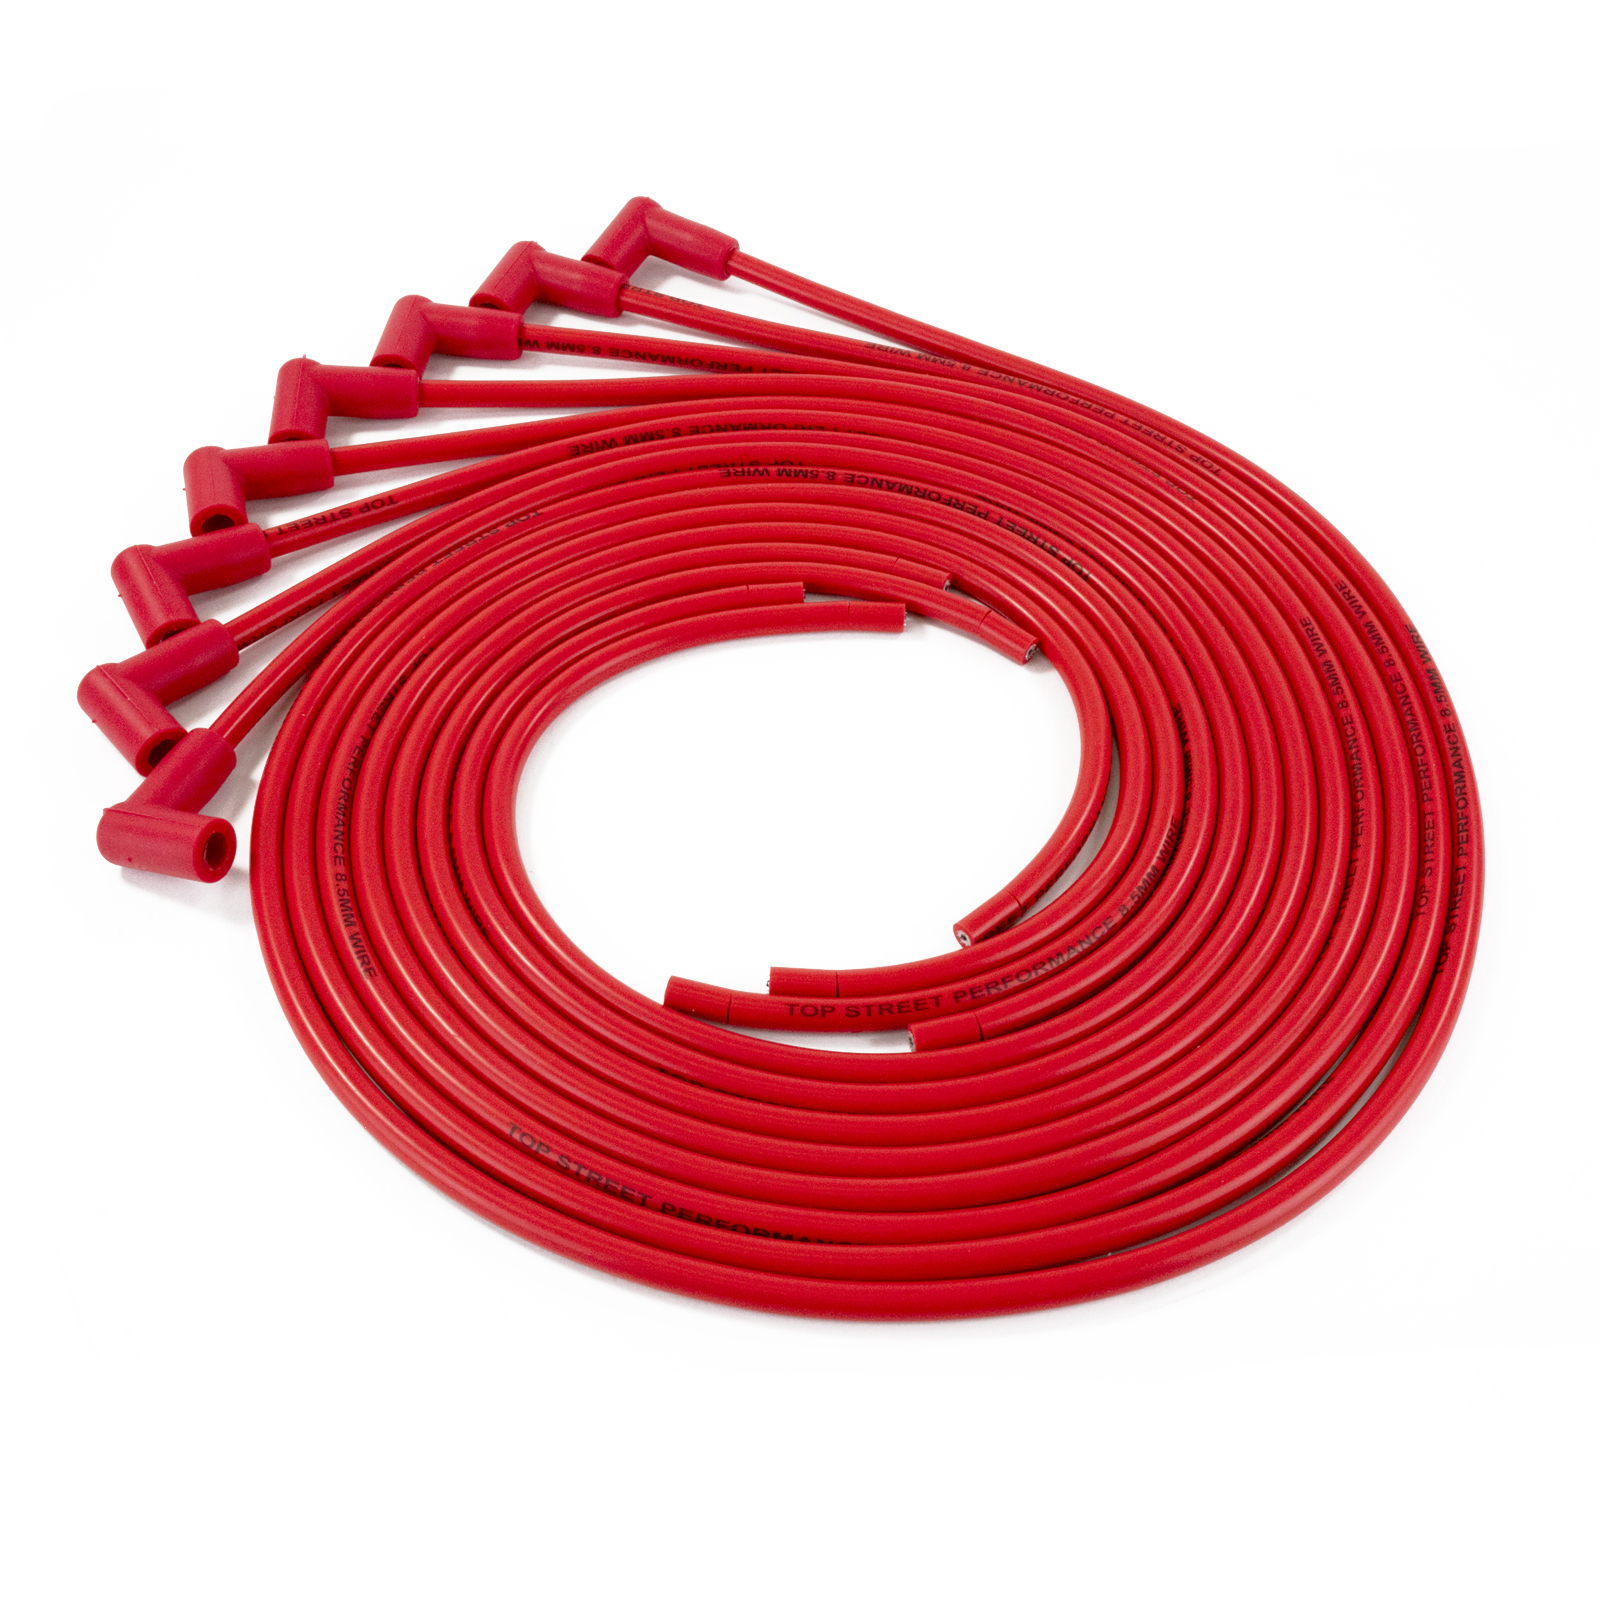 8.5mm Universal Red Ignition Wires with 90? Plug Boots